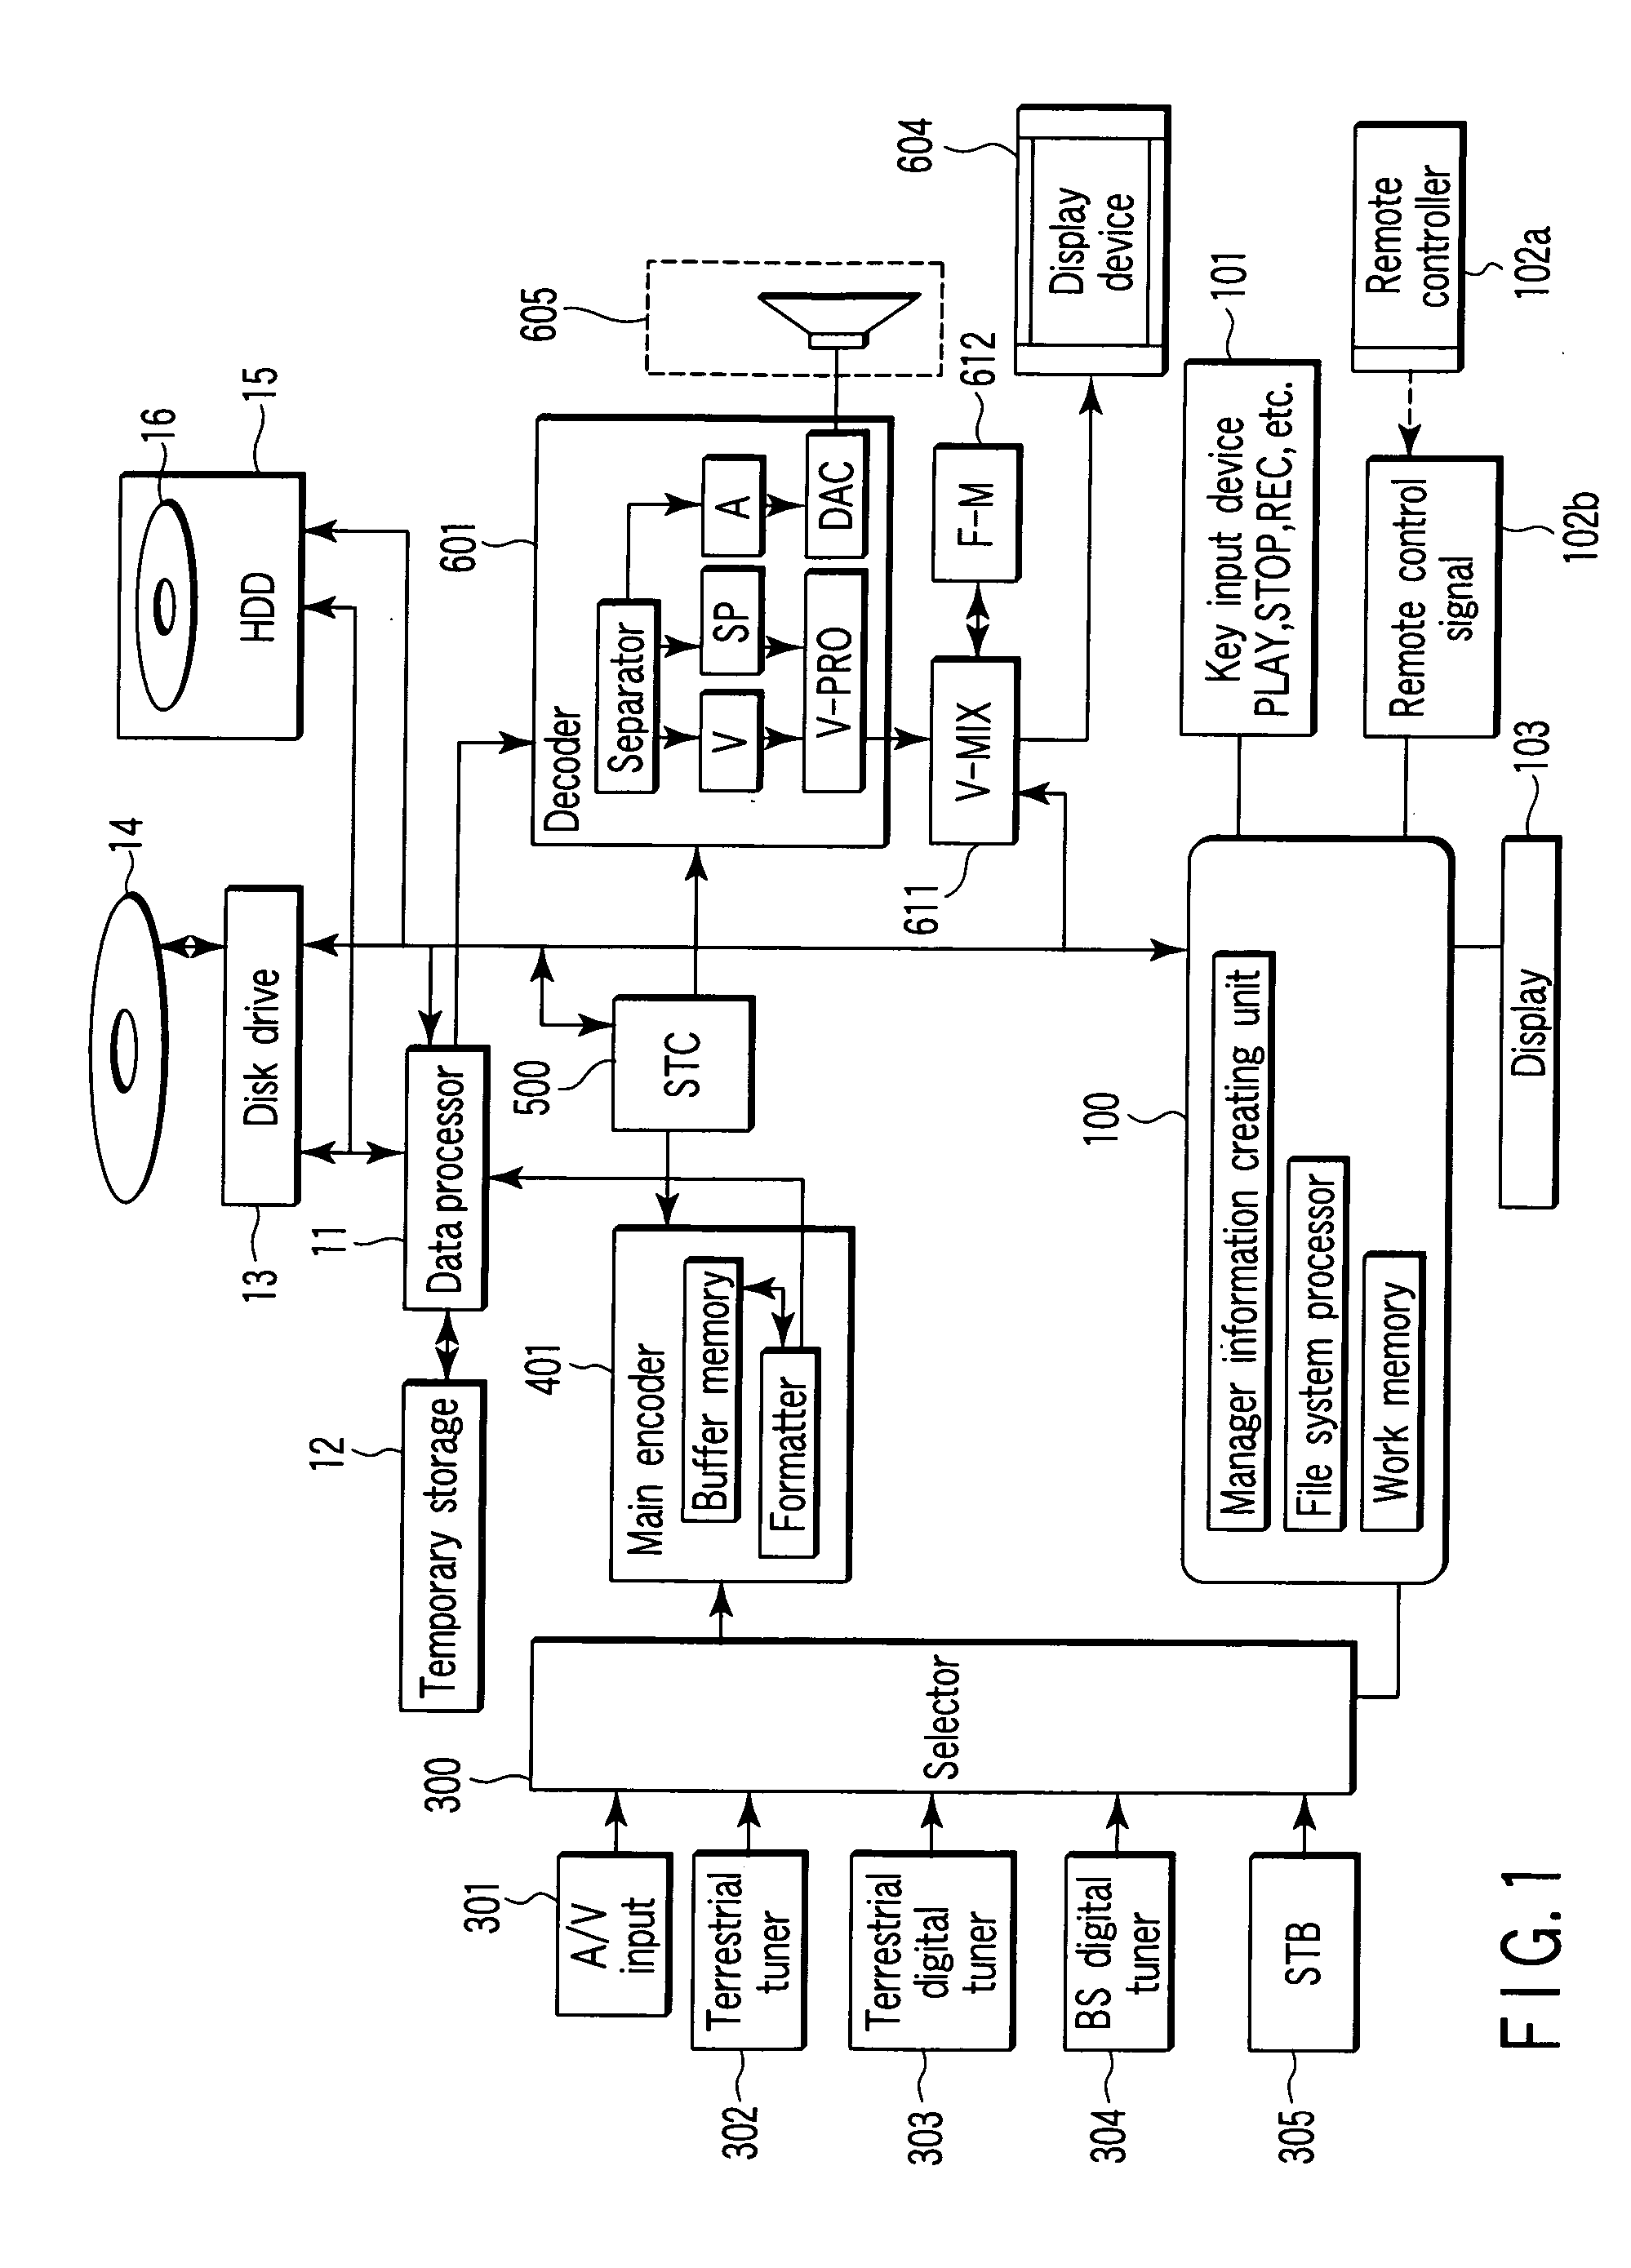 Optical disk, optical disk recording method, and optical disk recording apparatus